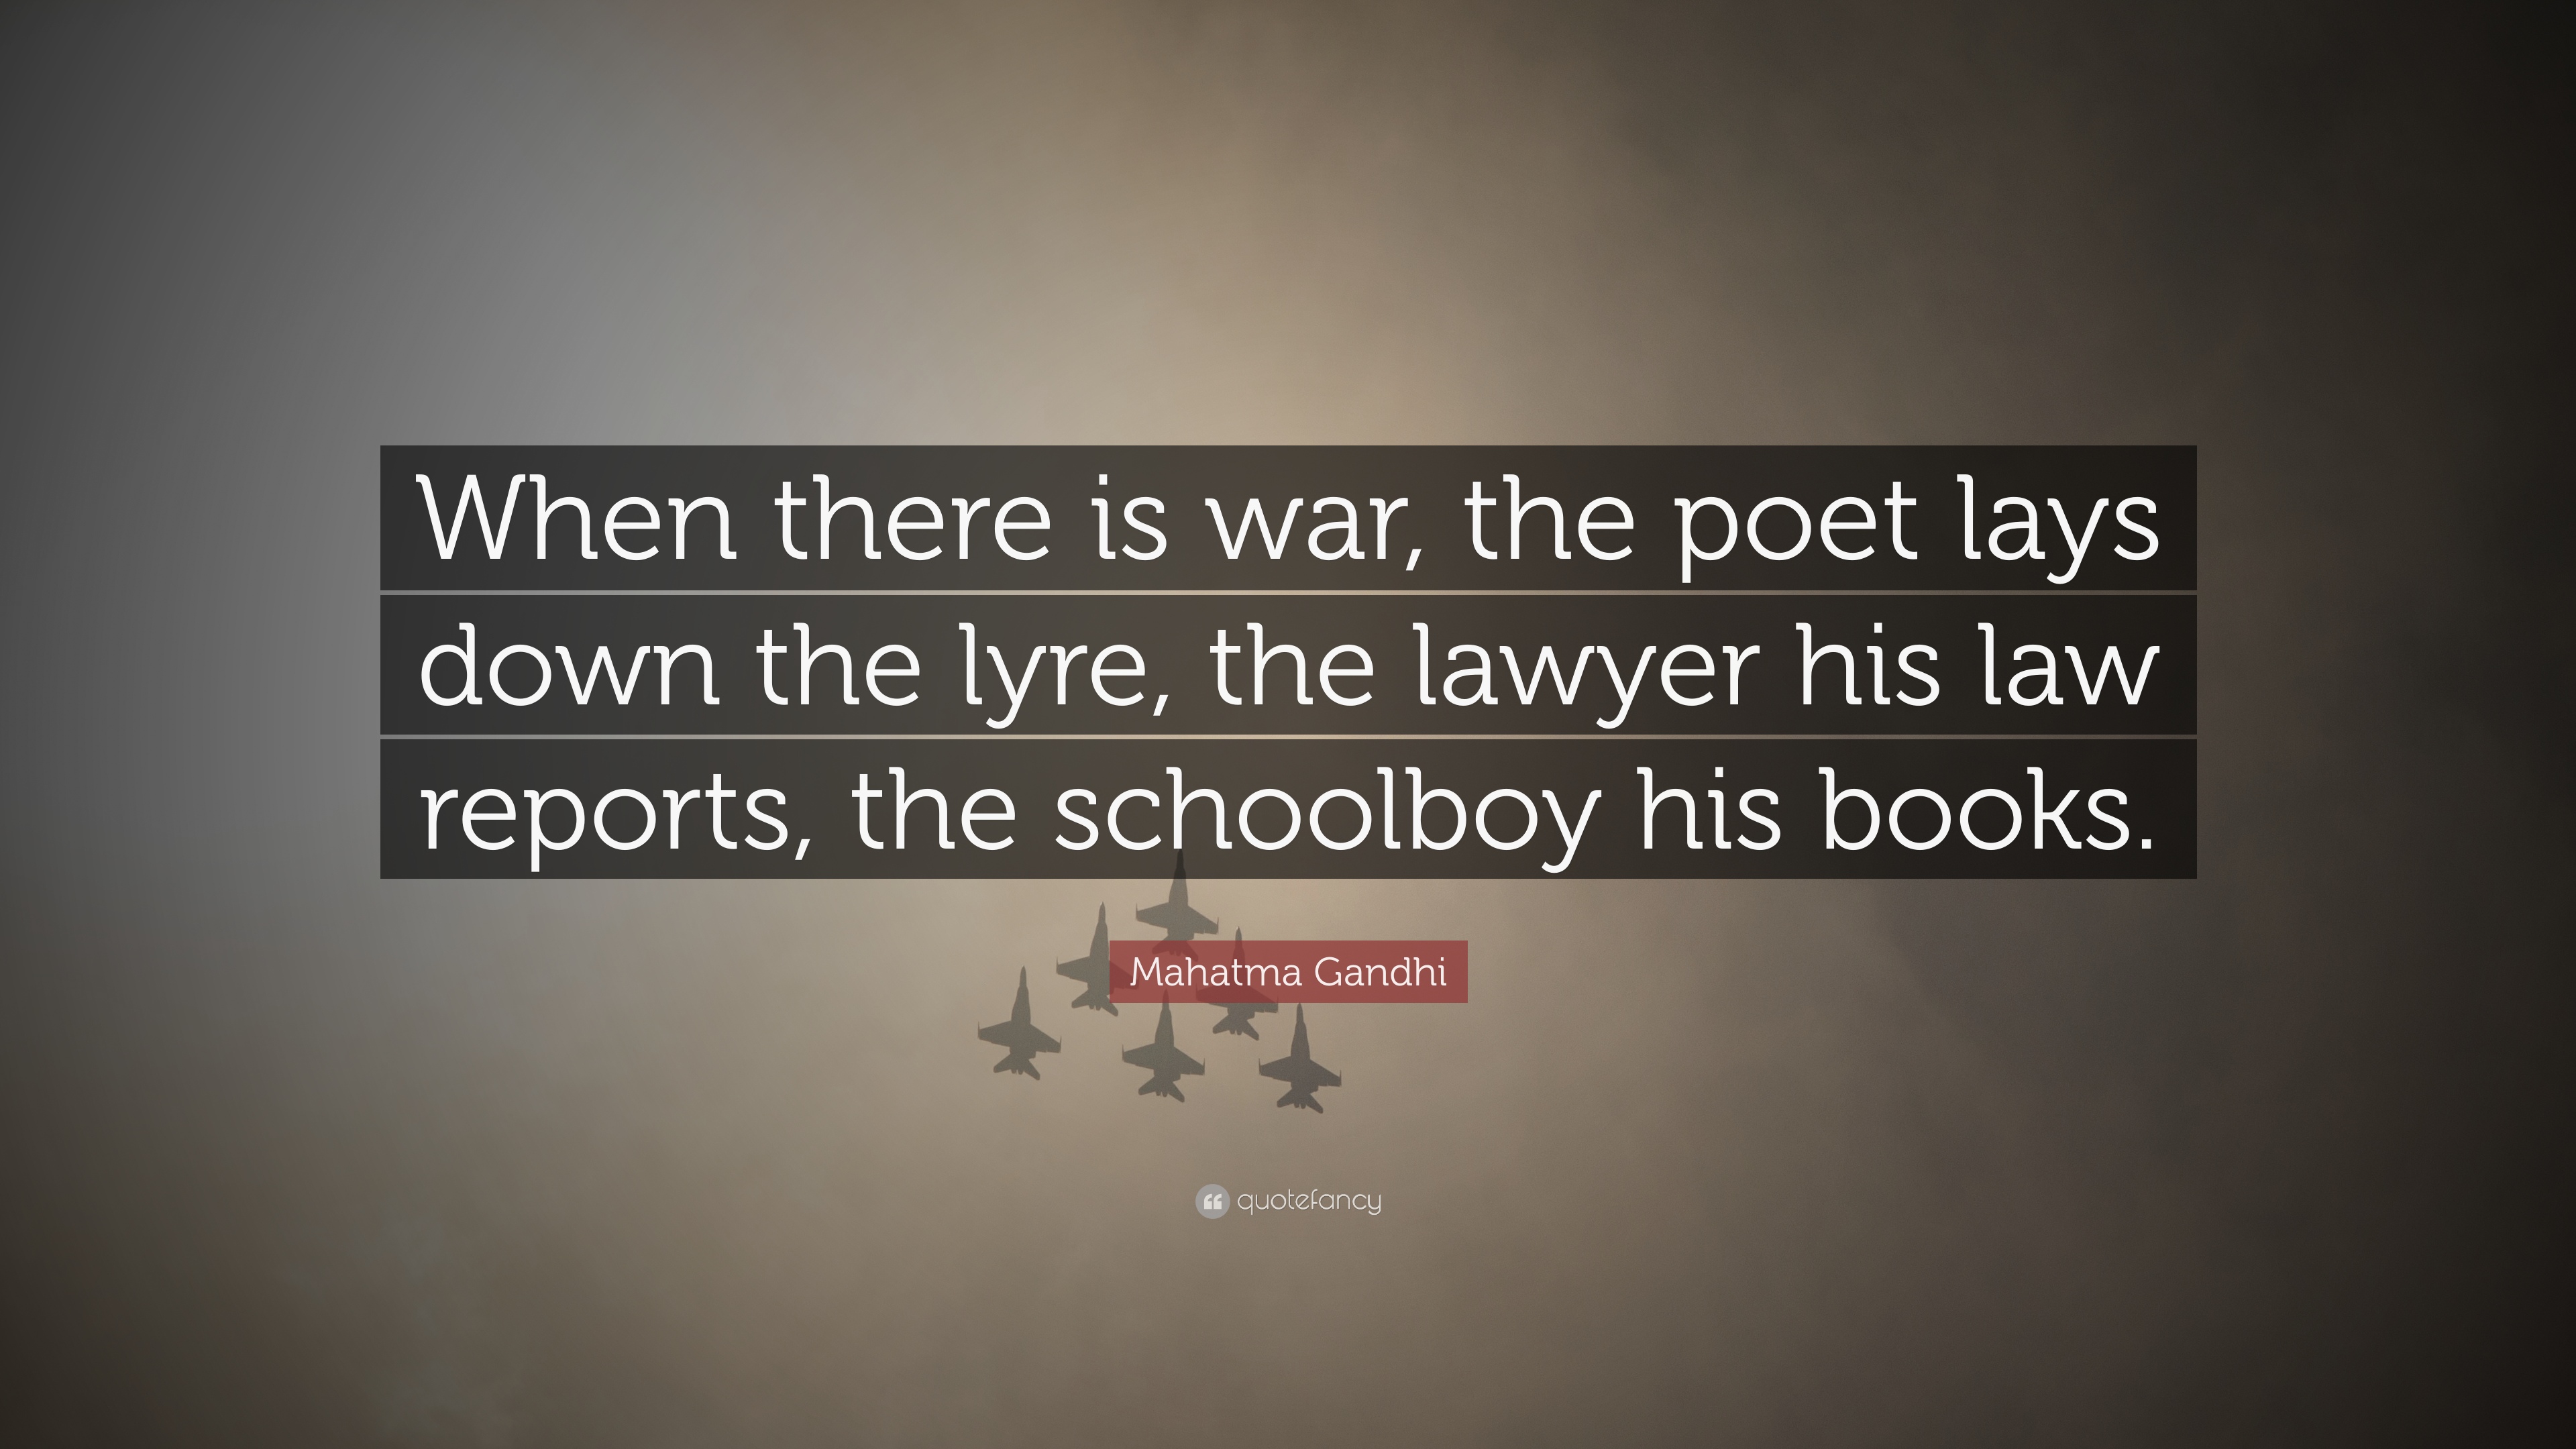 Mahatma Gandhi Quote: “When there is war, the poet lays down